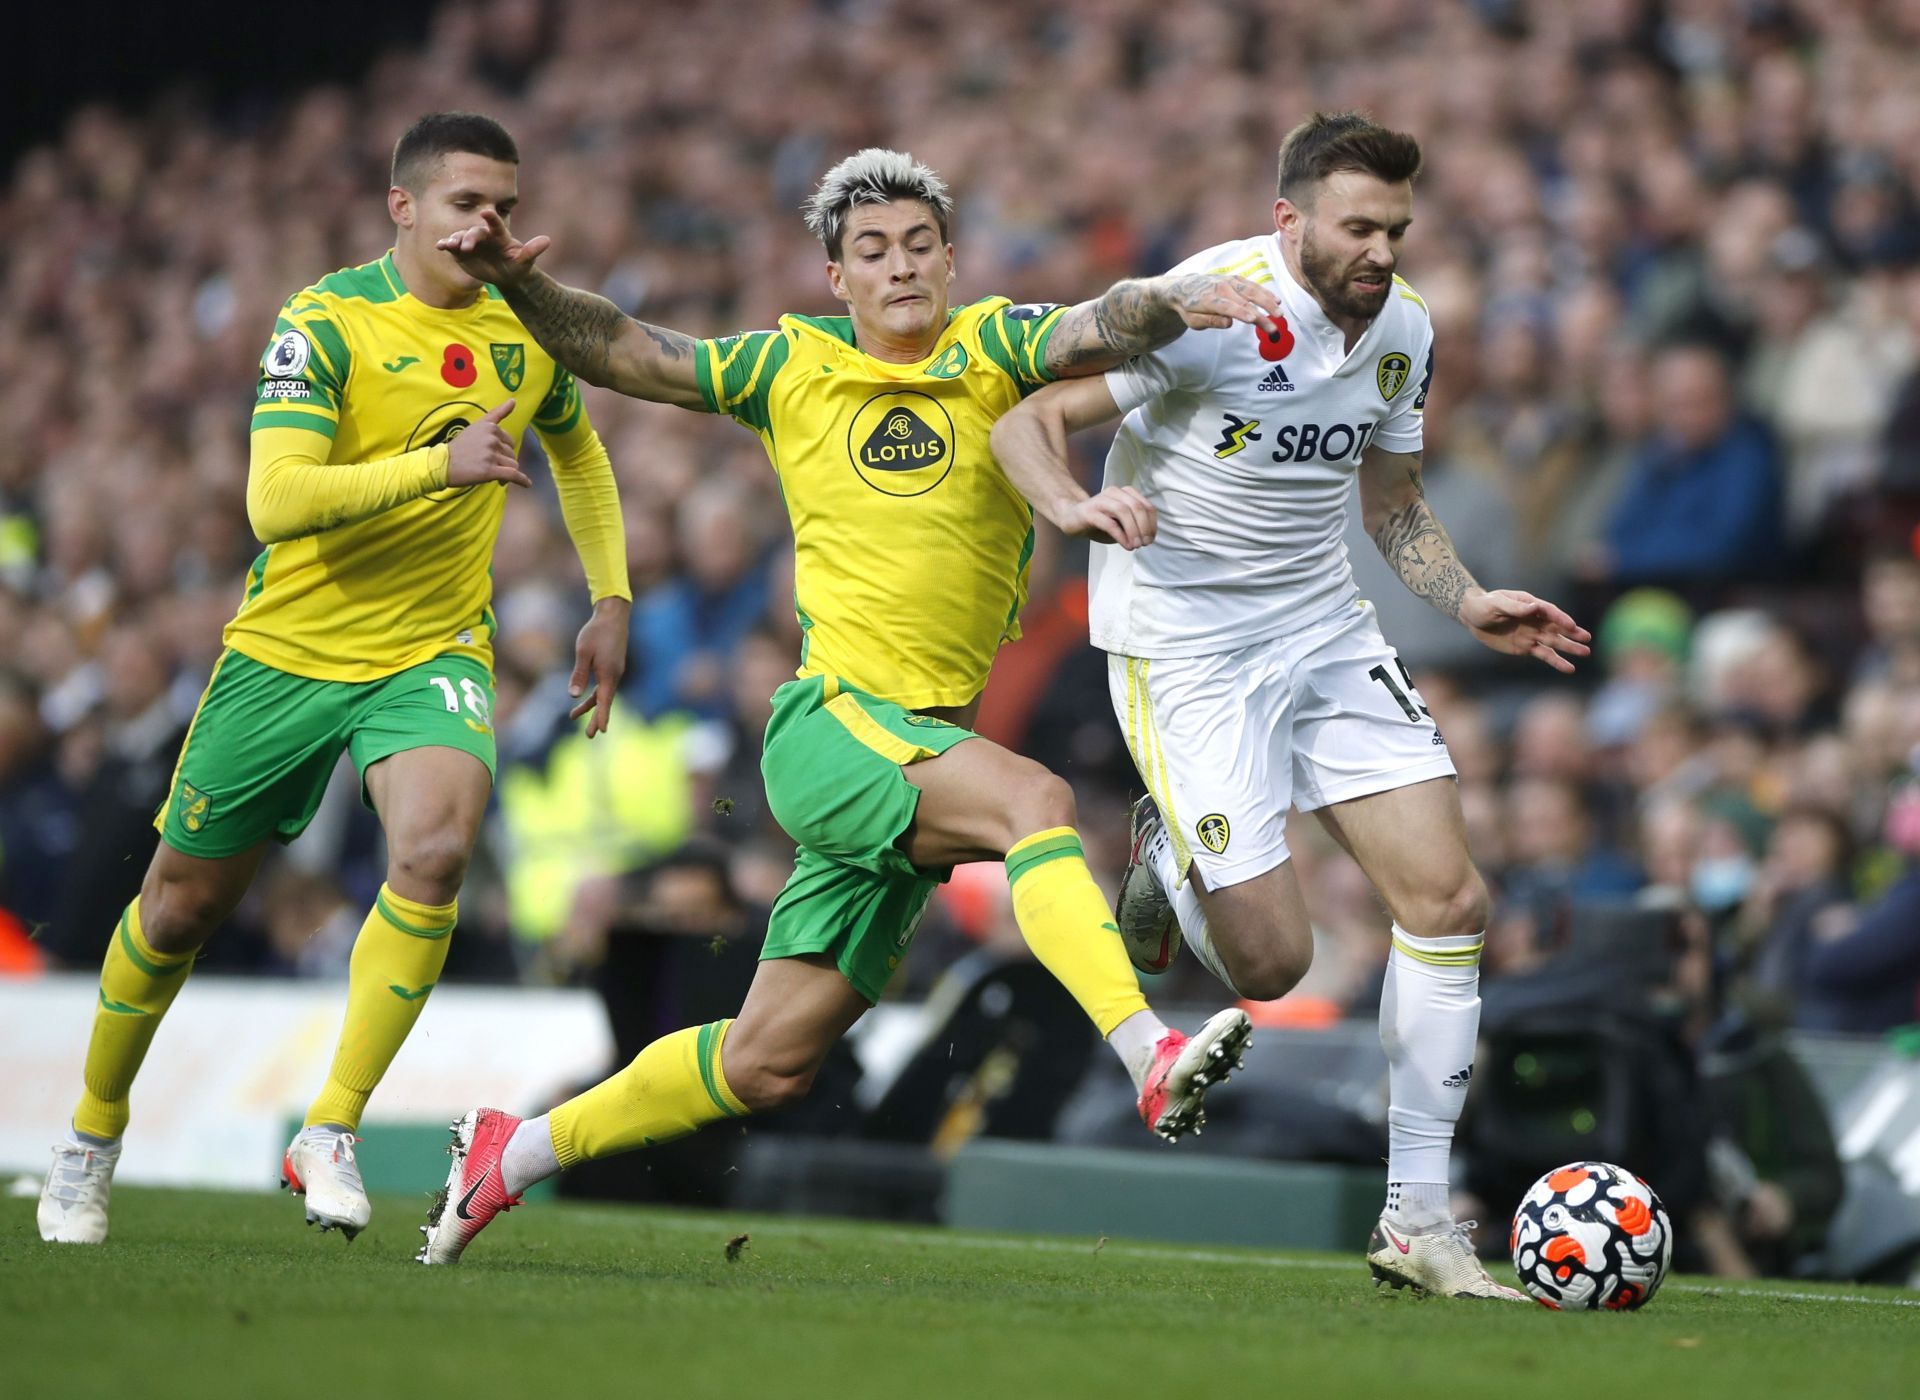 Leeds have won their last four clashes with Norwich 